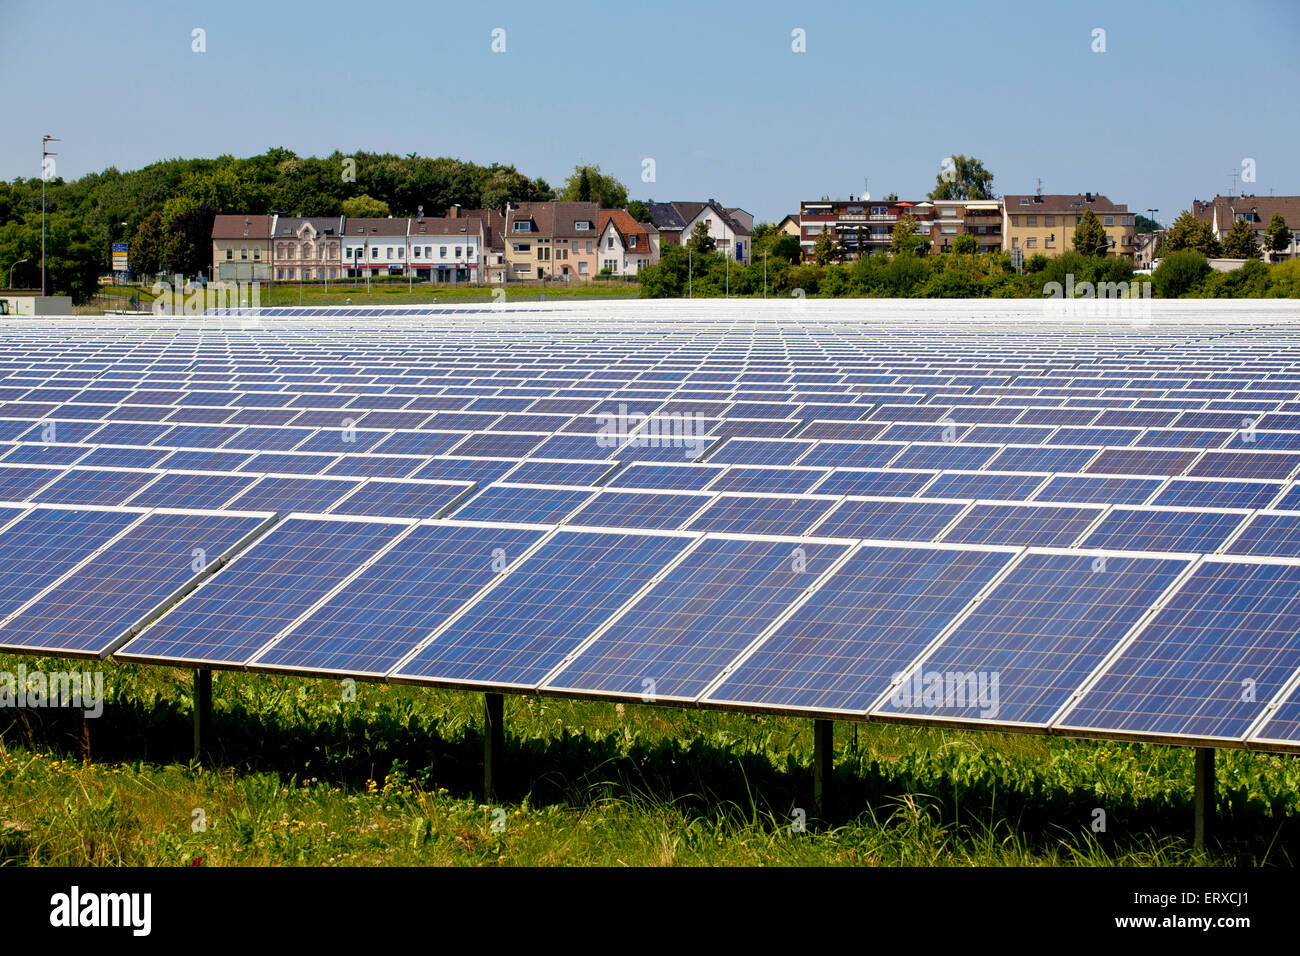 Europe, Germany, North Rhine-Westphalia, Troisdorf, solar park Oberlar, with an area of 80.000 square meters, the plant is one o Stock Photo